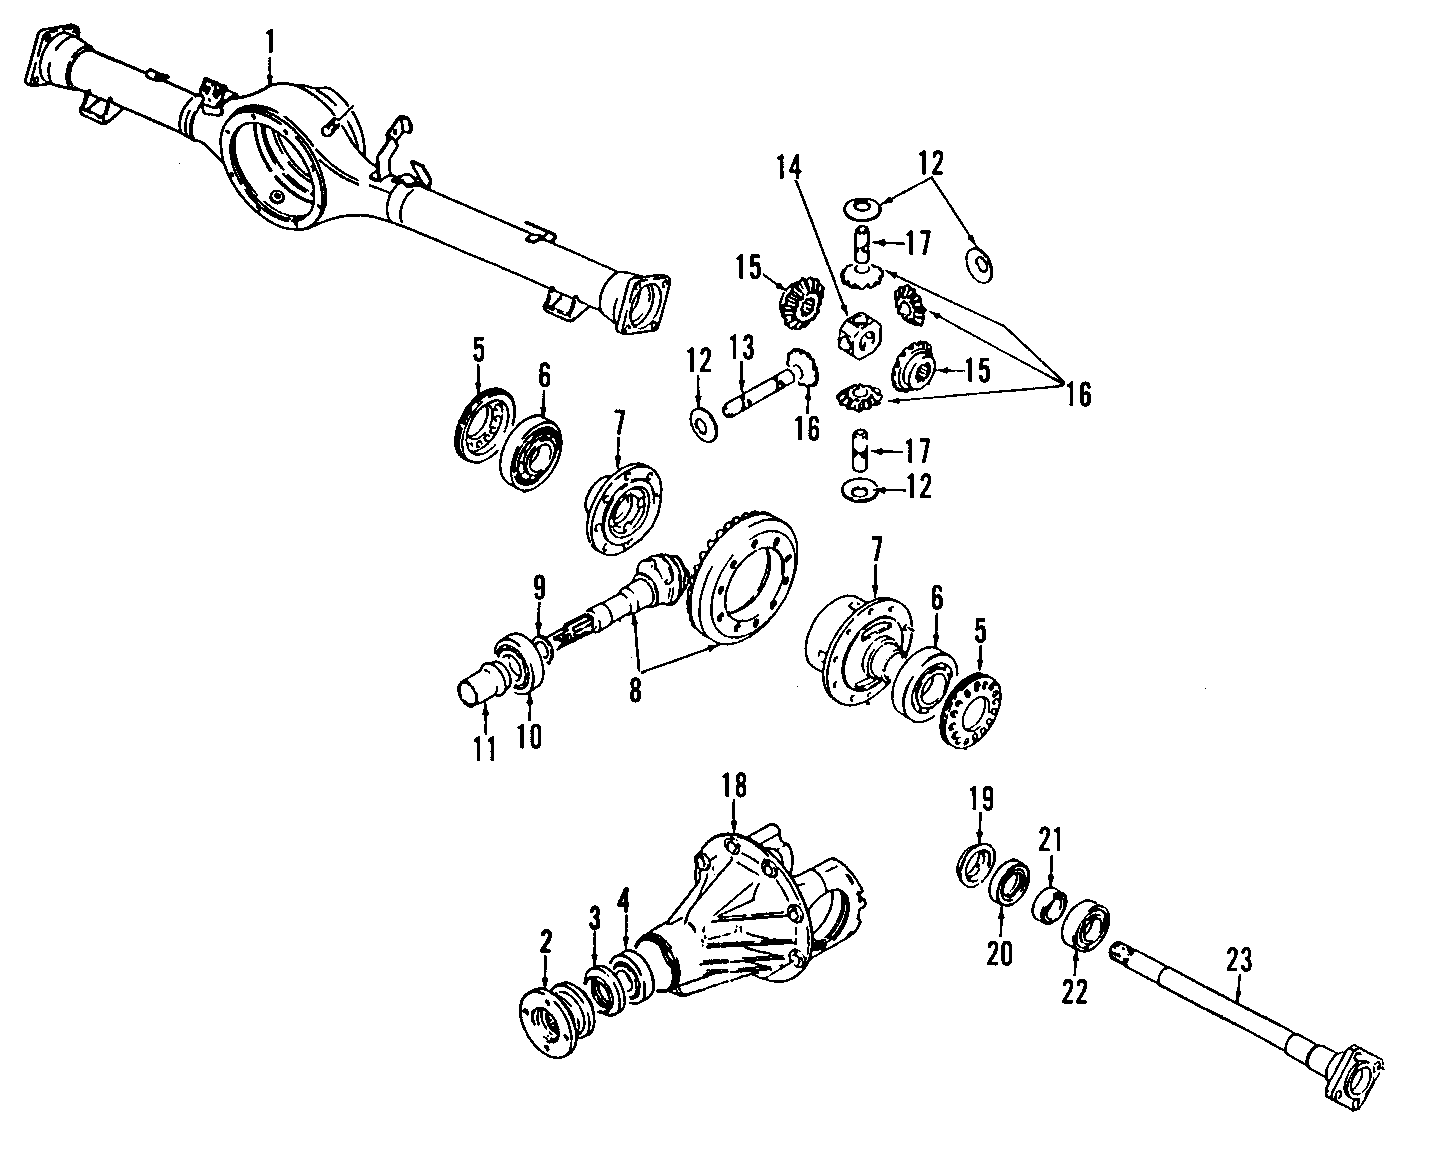 14REAR AXLE. DIFFERENTIAL. PROPELLER SHAFT.https://images.simplepart.com/images/parts/motor/fullsize/T011110.png